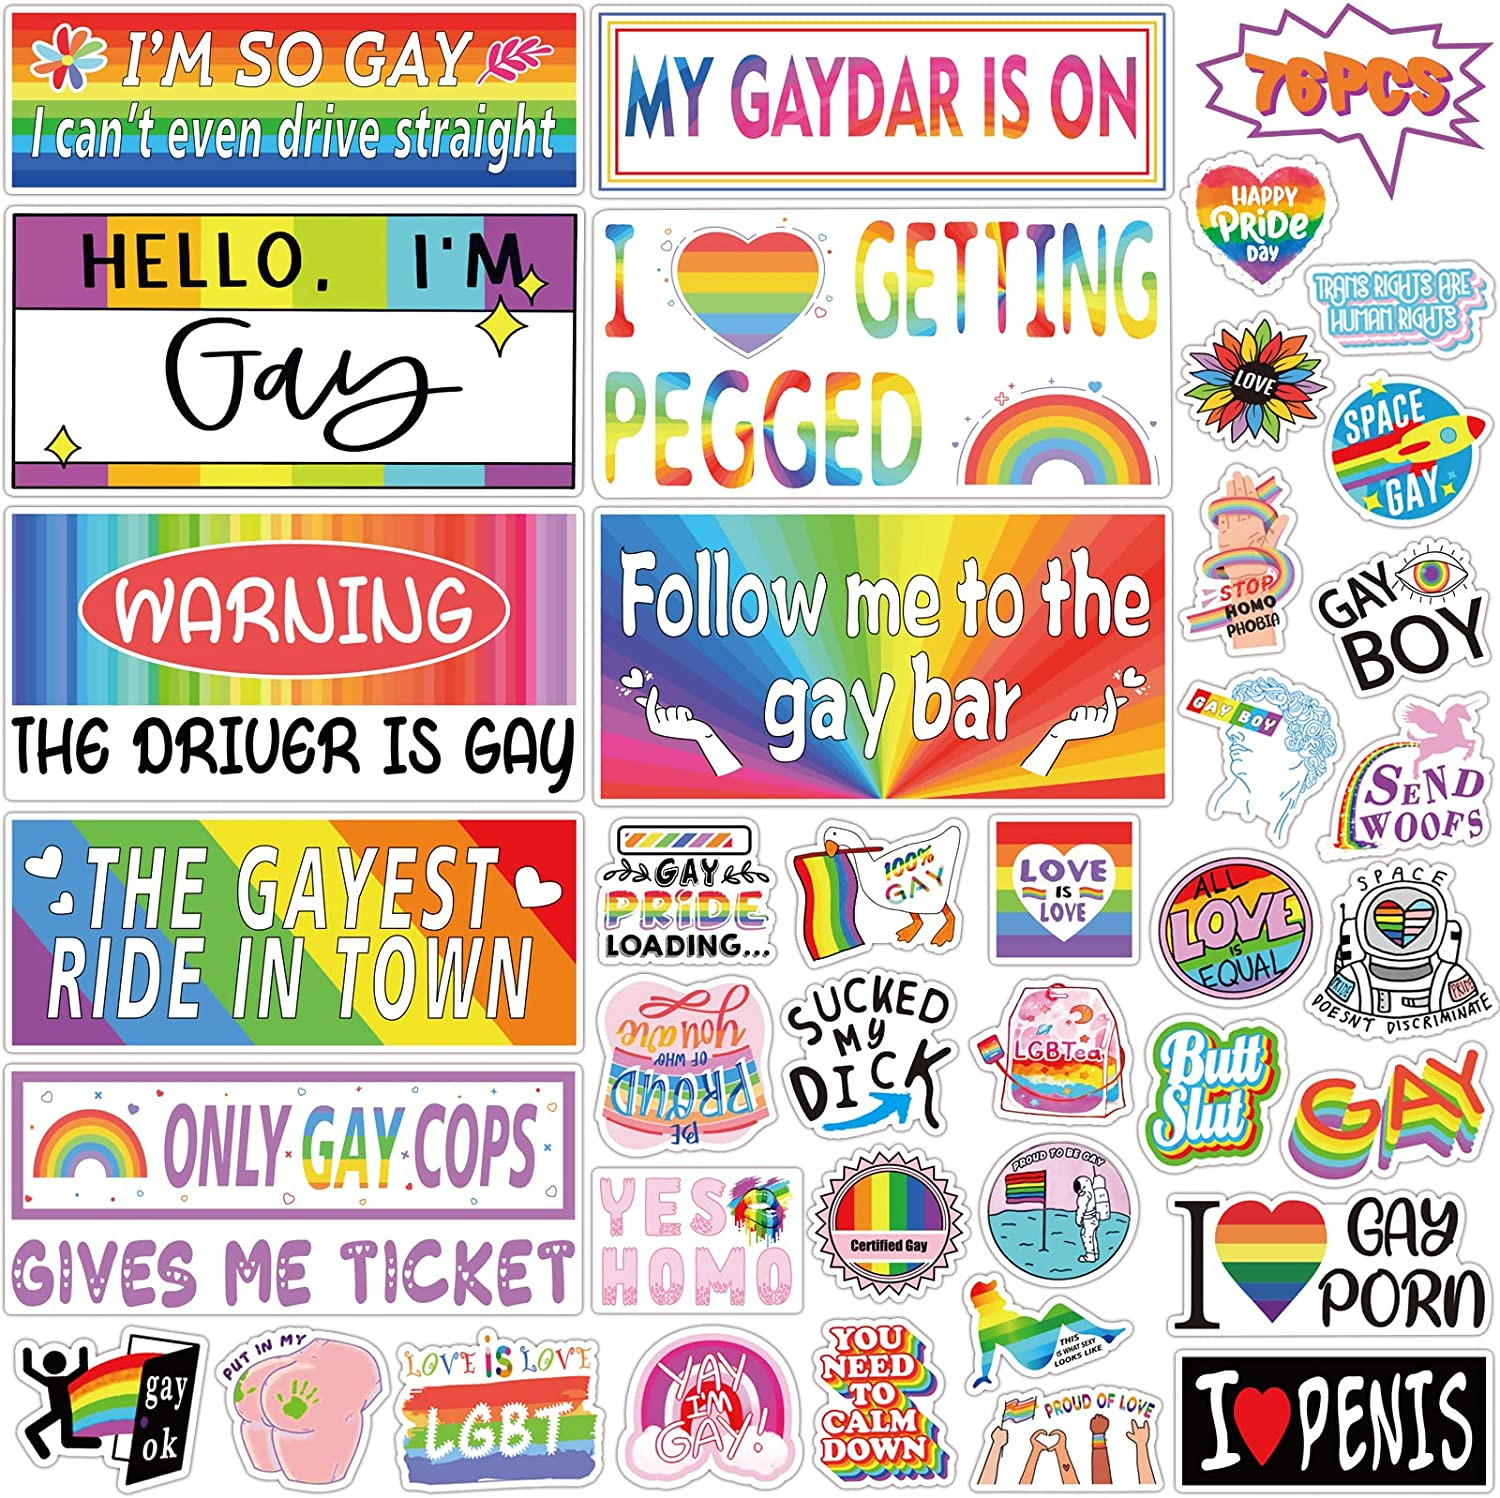 76 PCS Original Funny Prank Bumper Stickers, Funny LGBT Gay Stickers for Vehicle